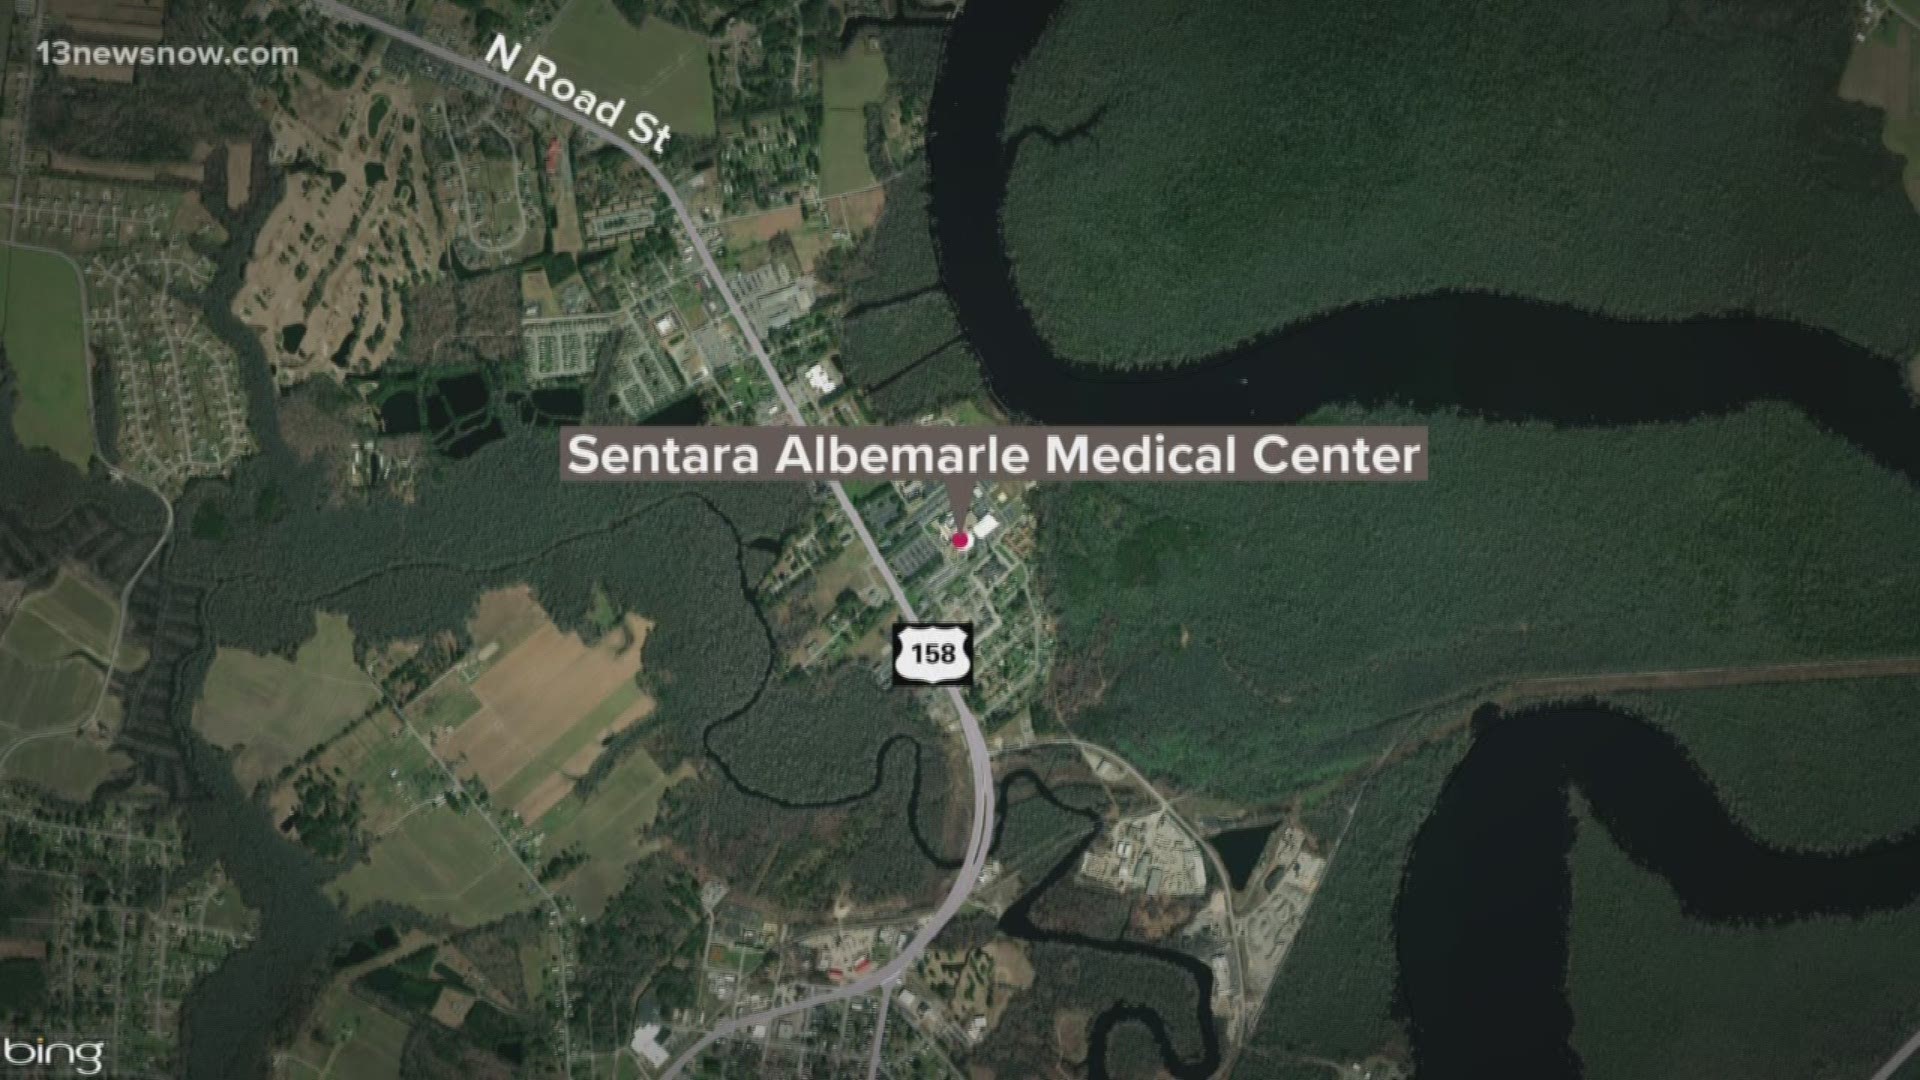 A threat prompted a lockdown at Sentara Albemarle Medical Center in Elizabeth City. Visitors and patients have to show ID at every entrance.